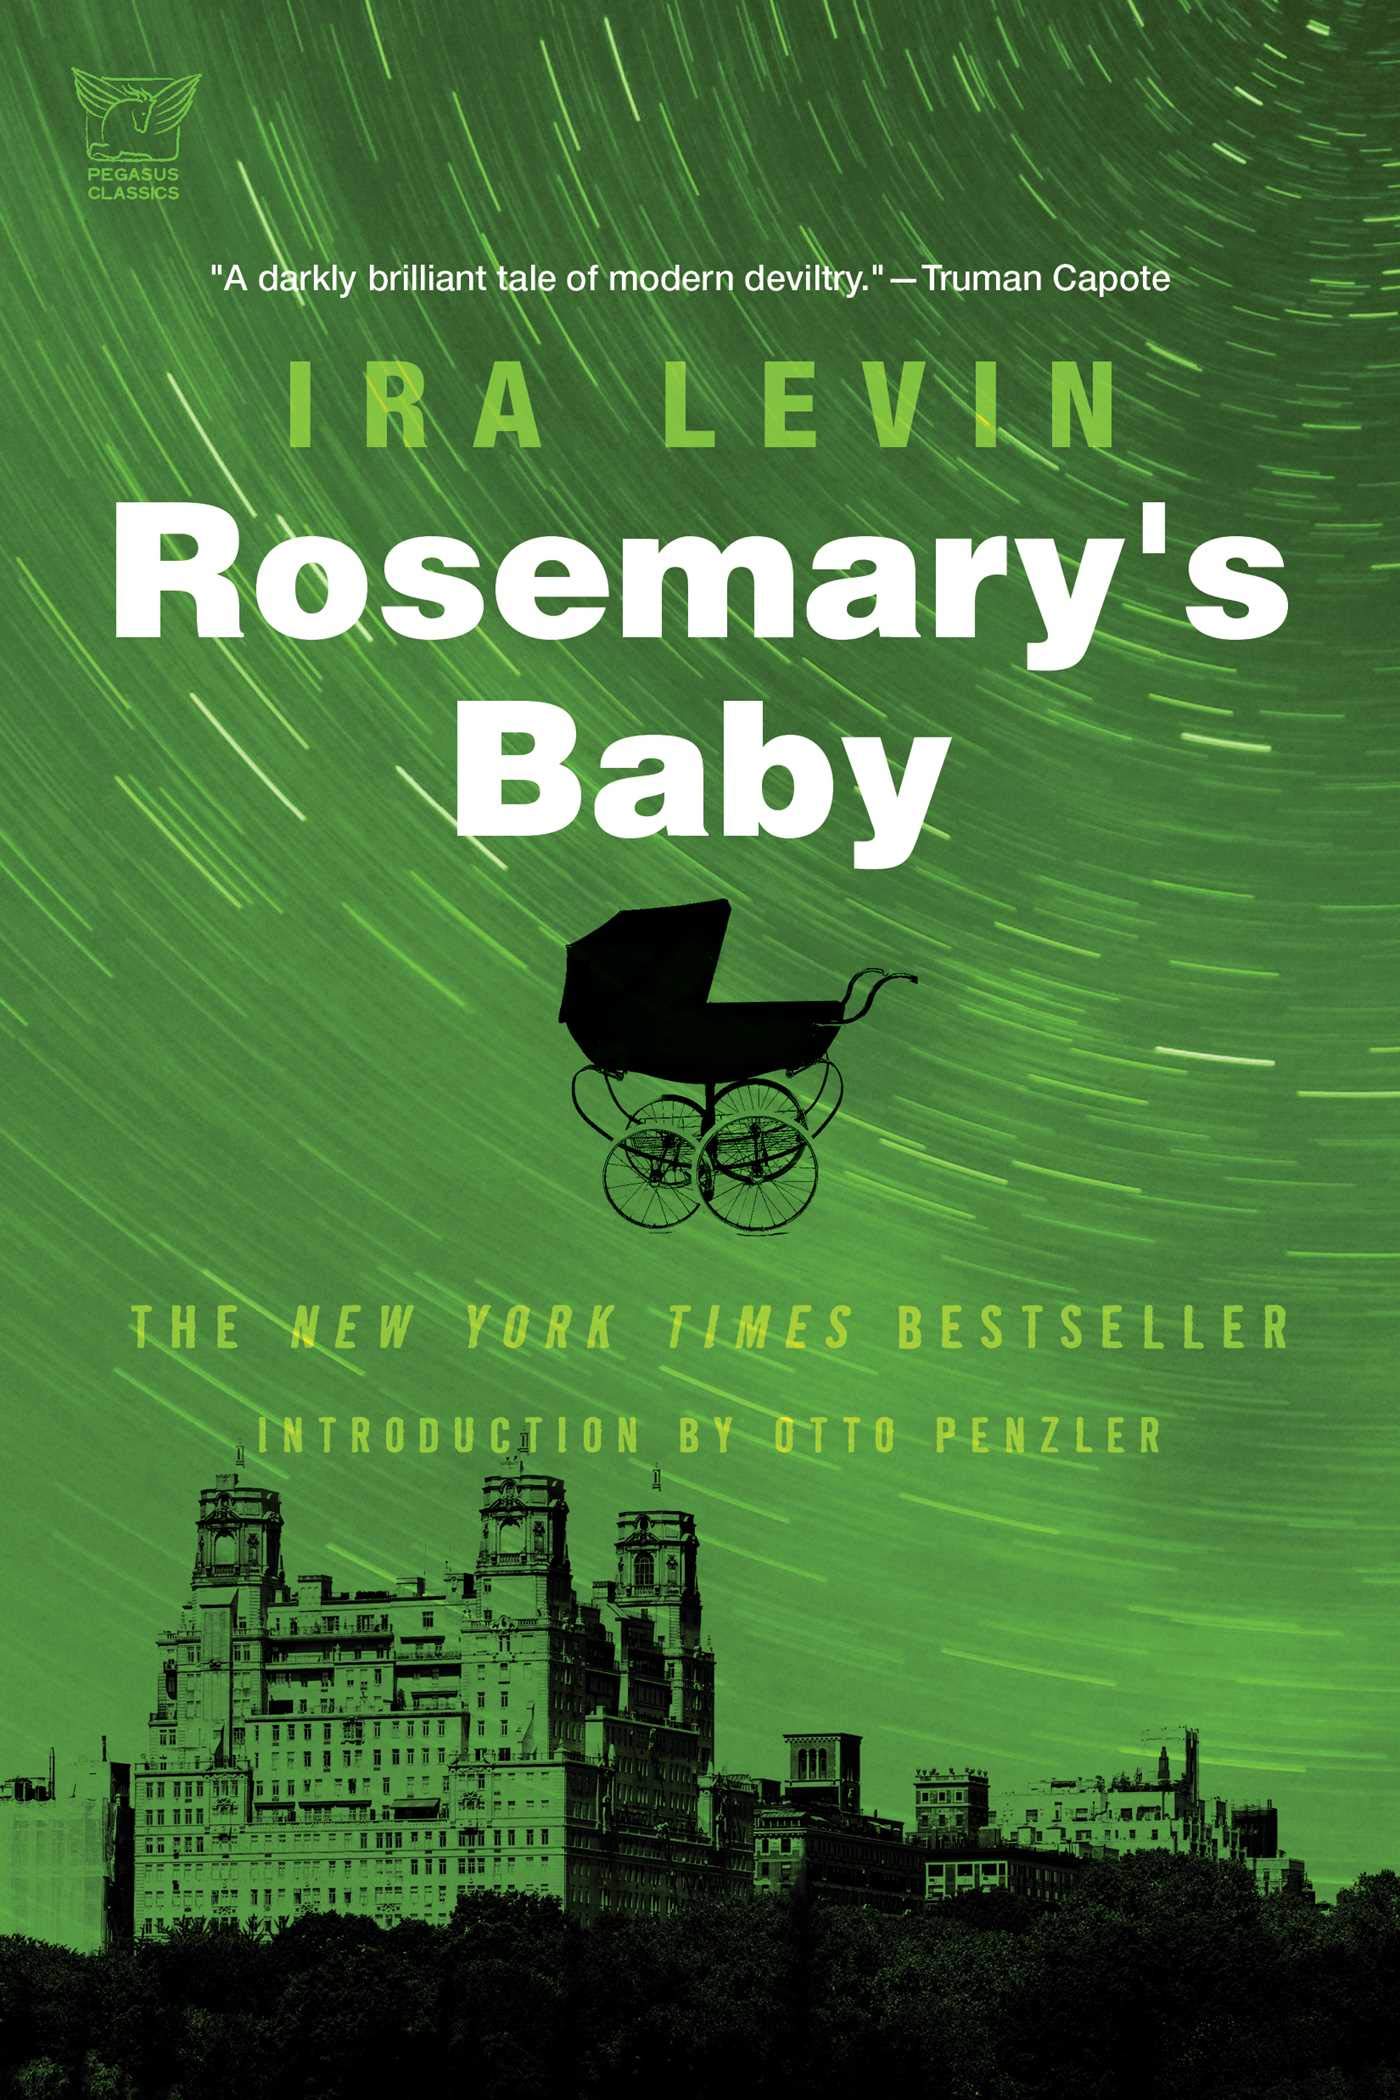 A baby carriage imposed on a green space-like background over an industrialist cityscape